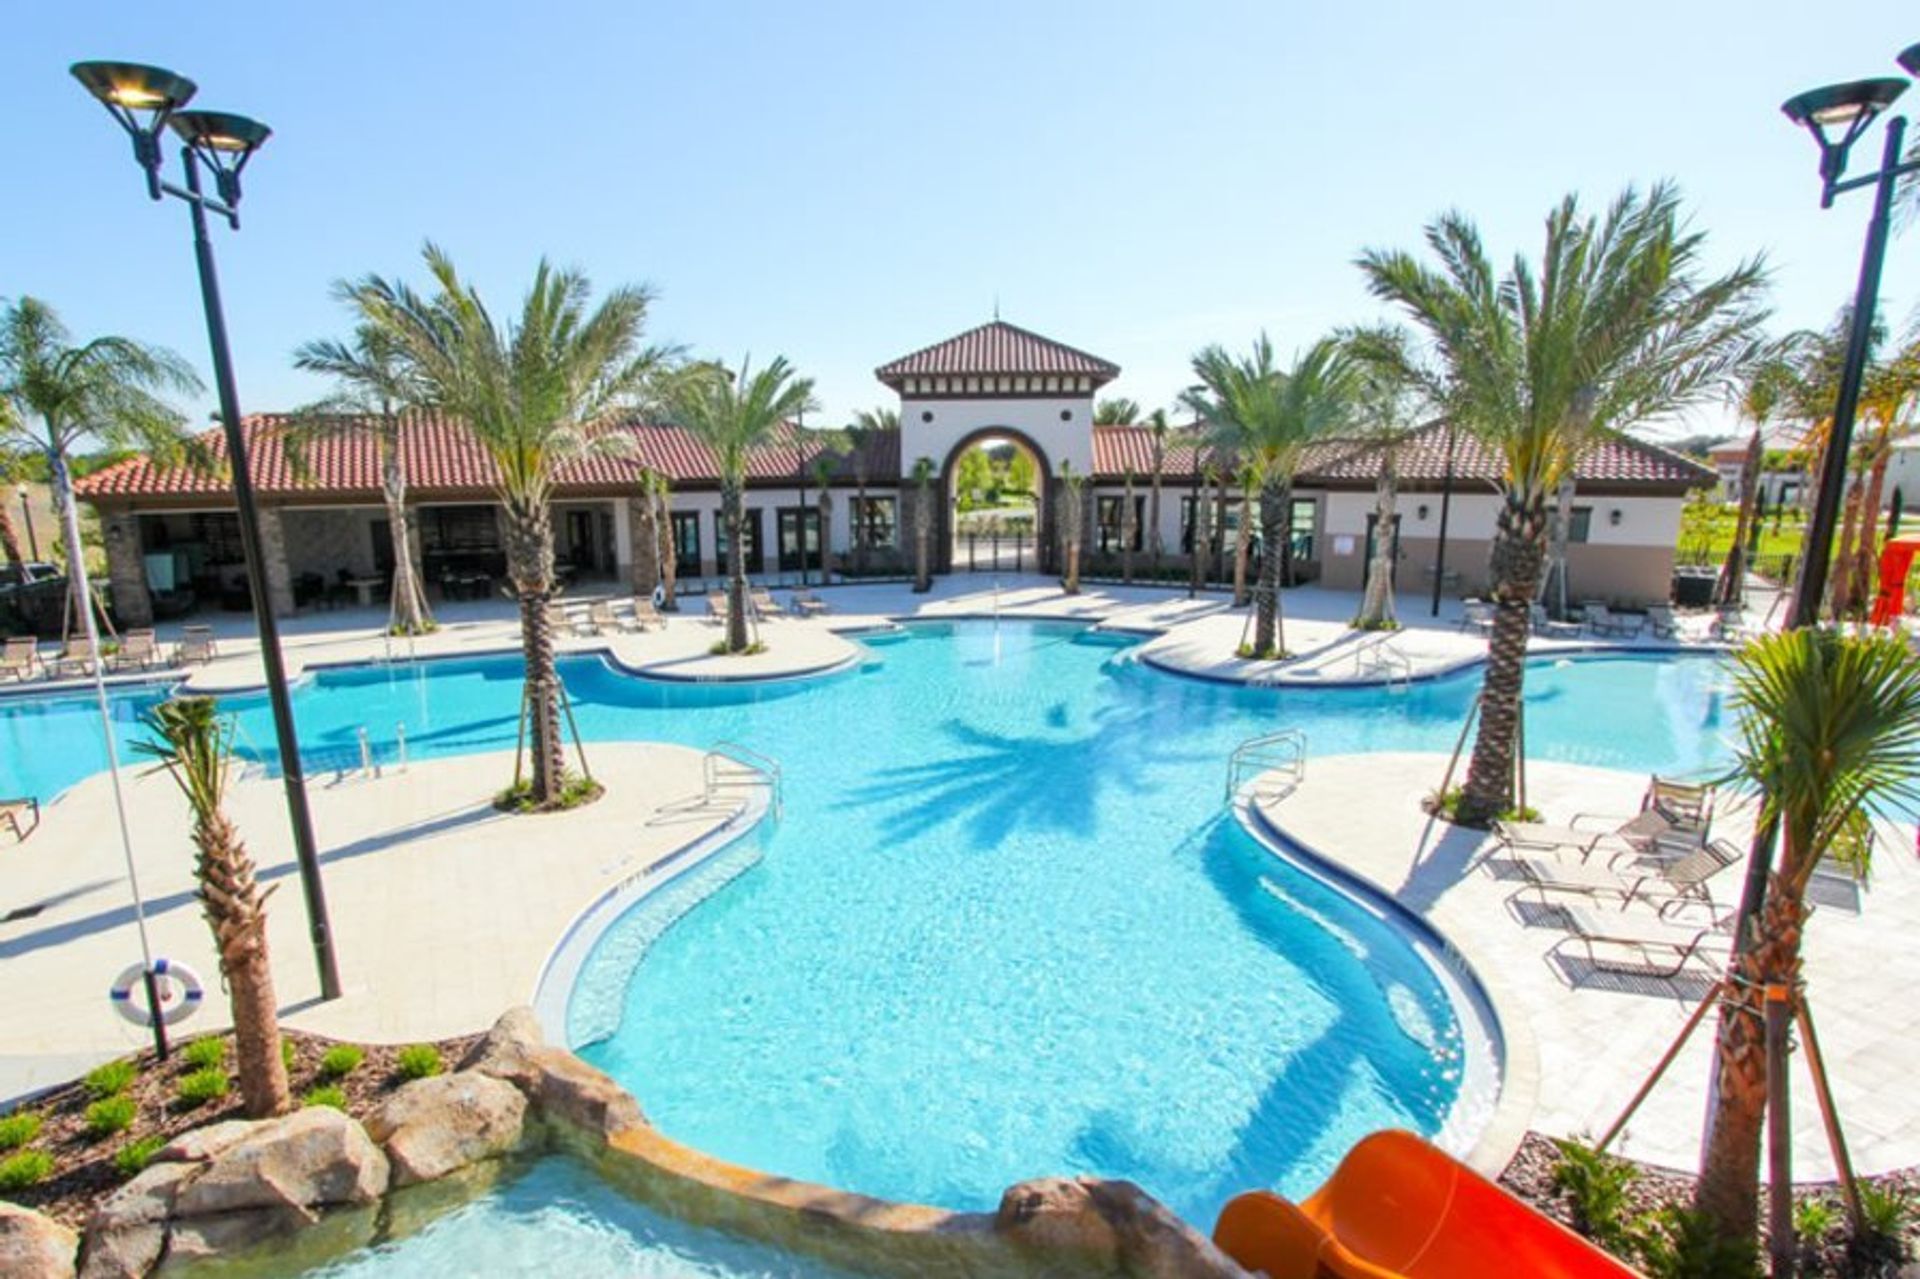 Stay in one of our luxury Orlando Disney villas with private pools